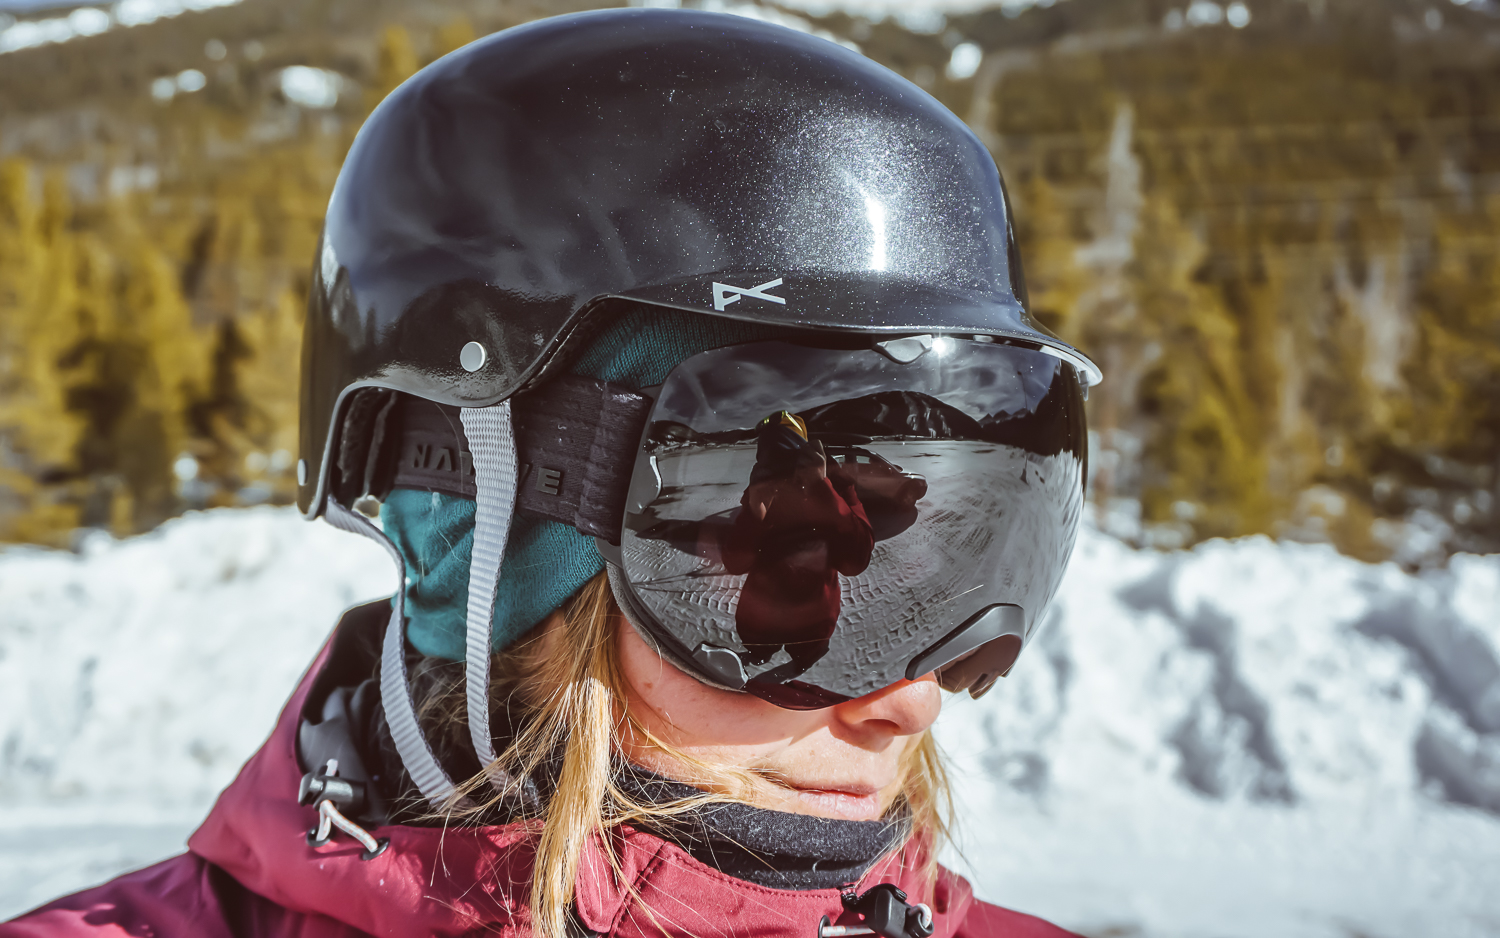 [Review] The Spindrift Goggles by Native – Adventure Rig